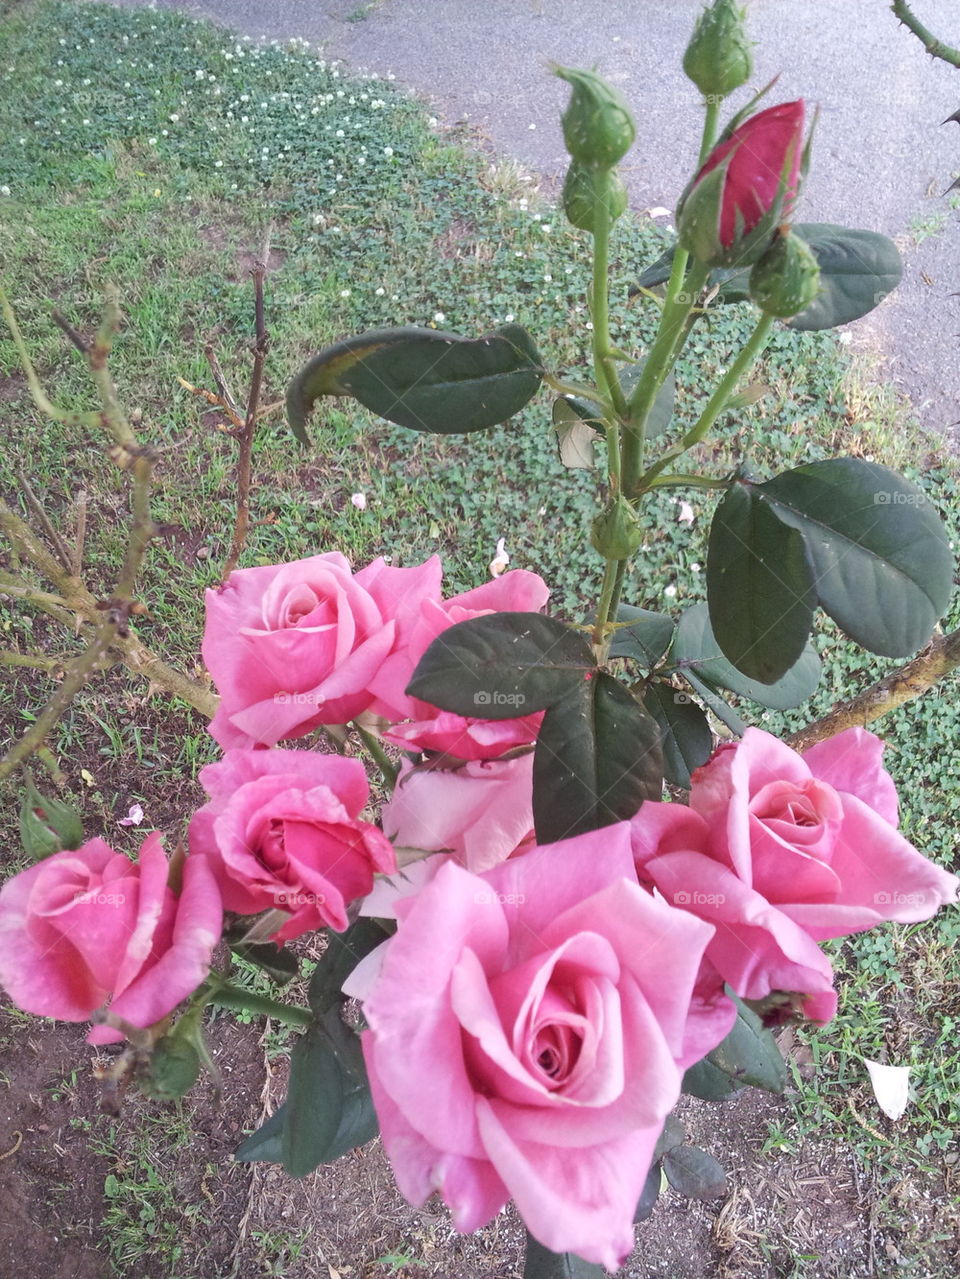 Many Rose Blossoms on One Stem